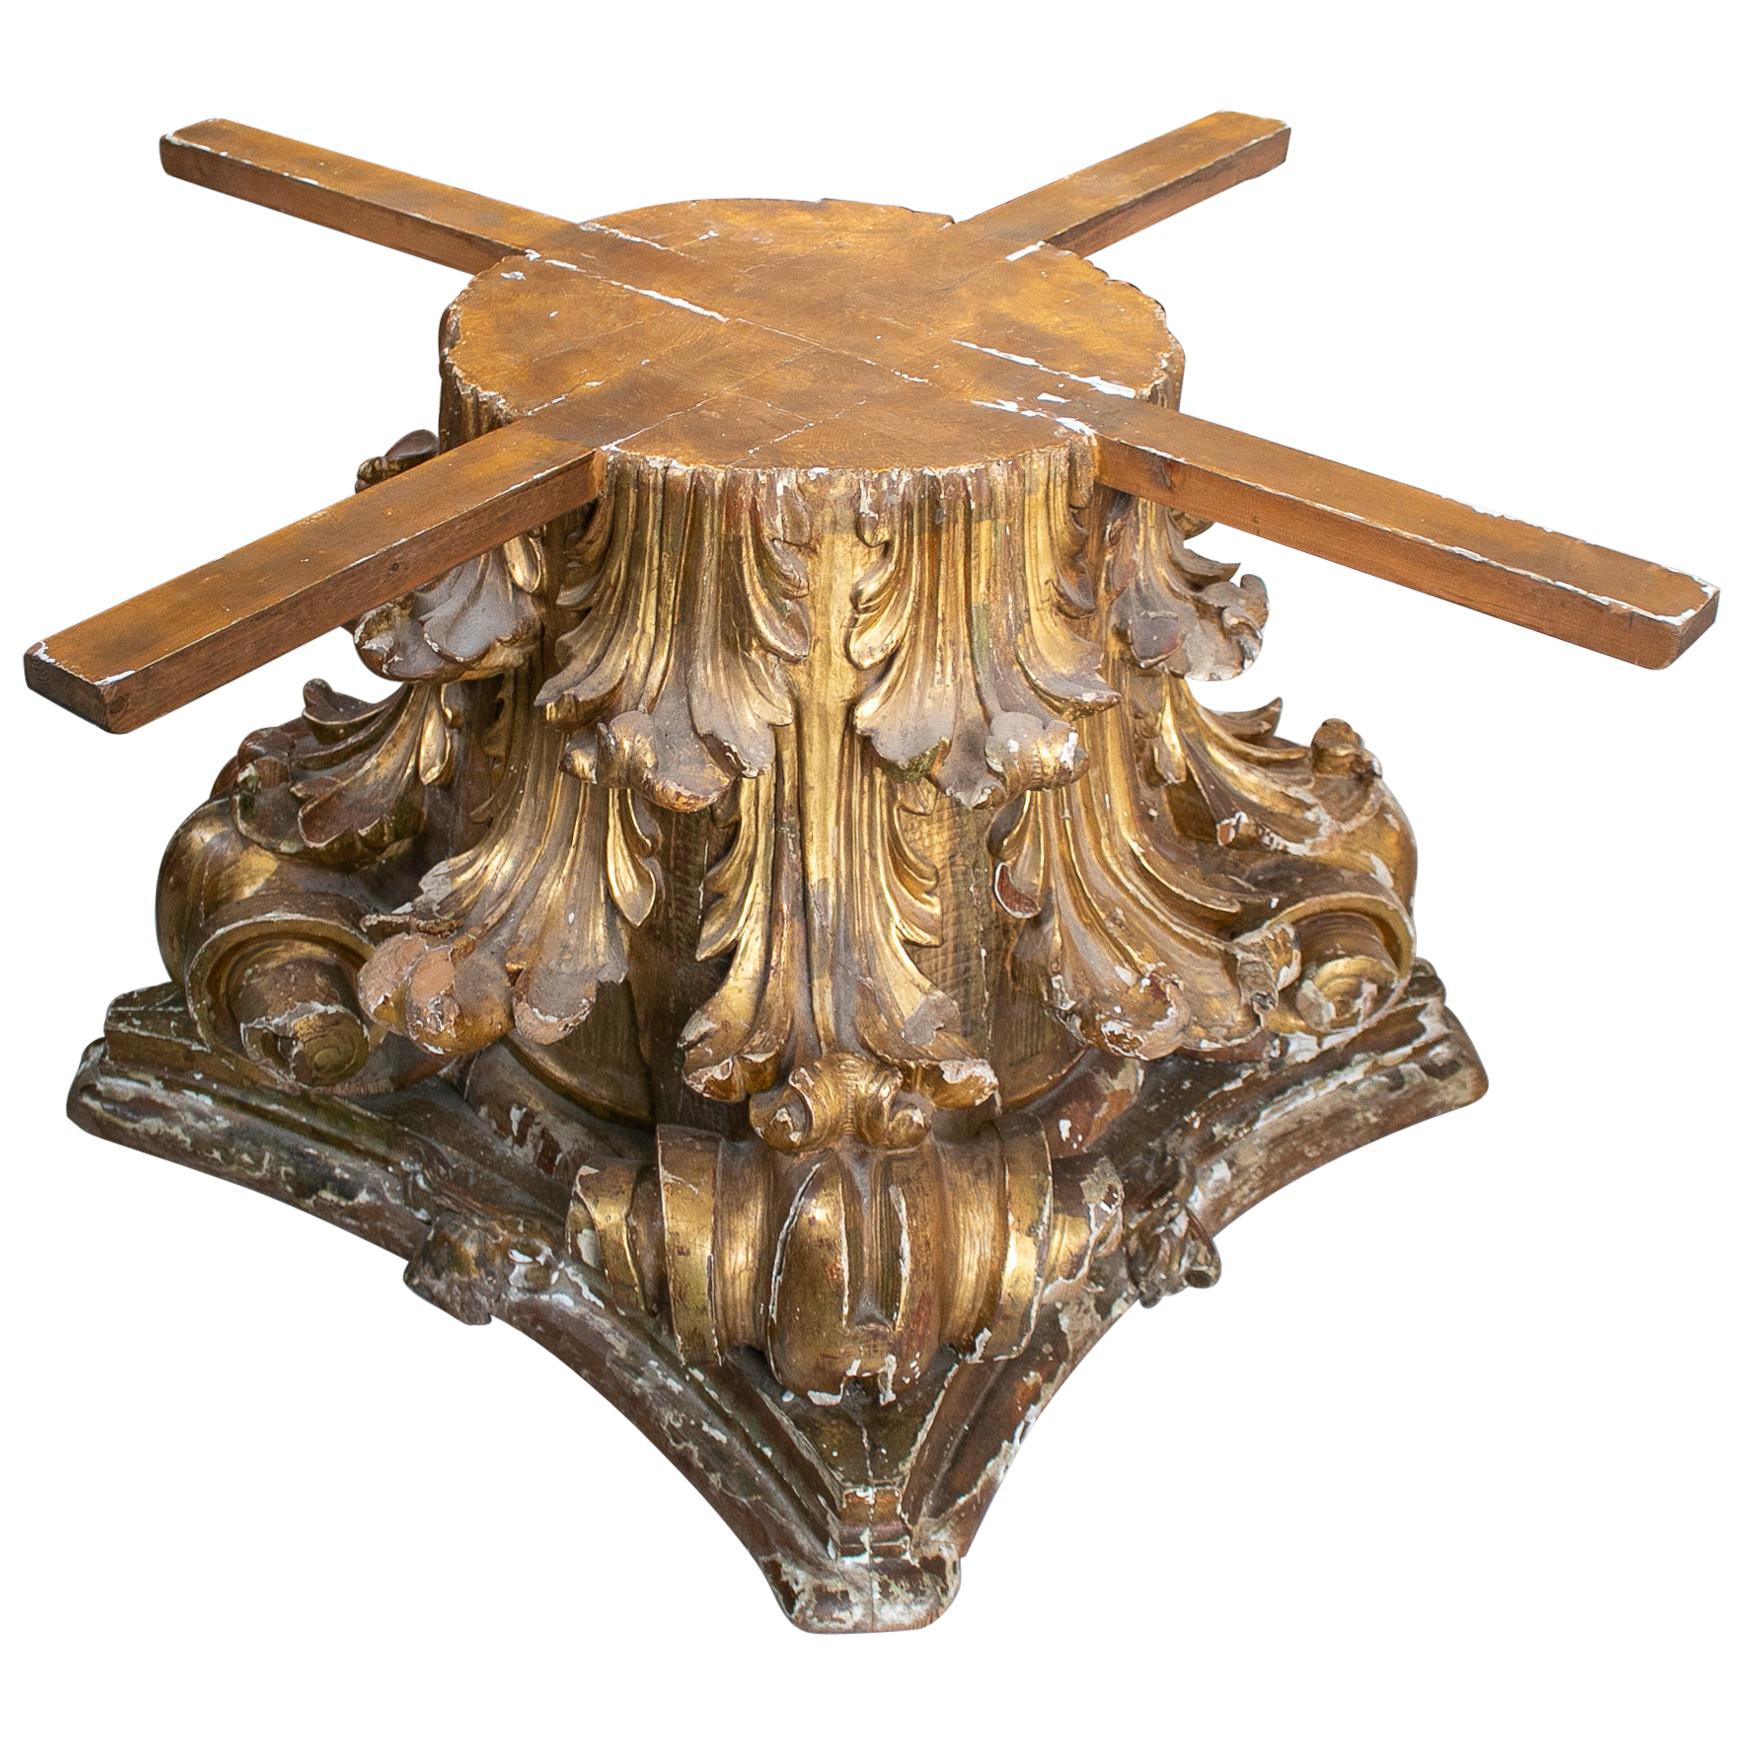 18th Century Spanish Wooden Corinthian Capital Table Base For Sale